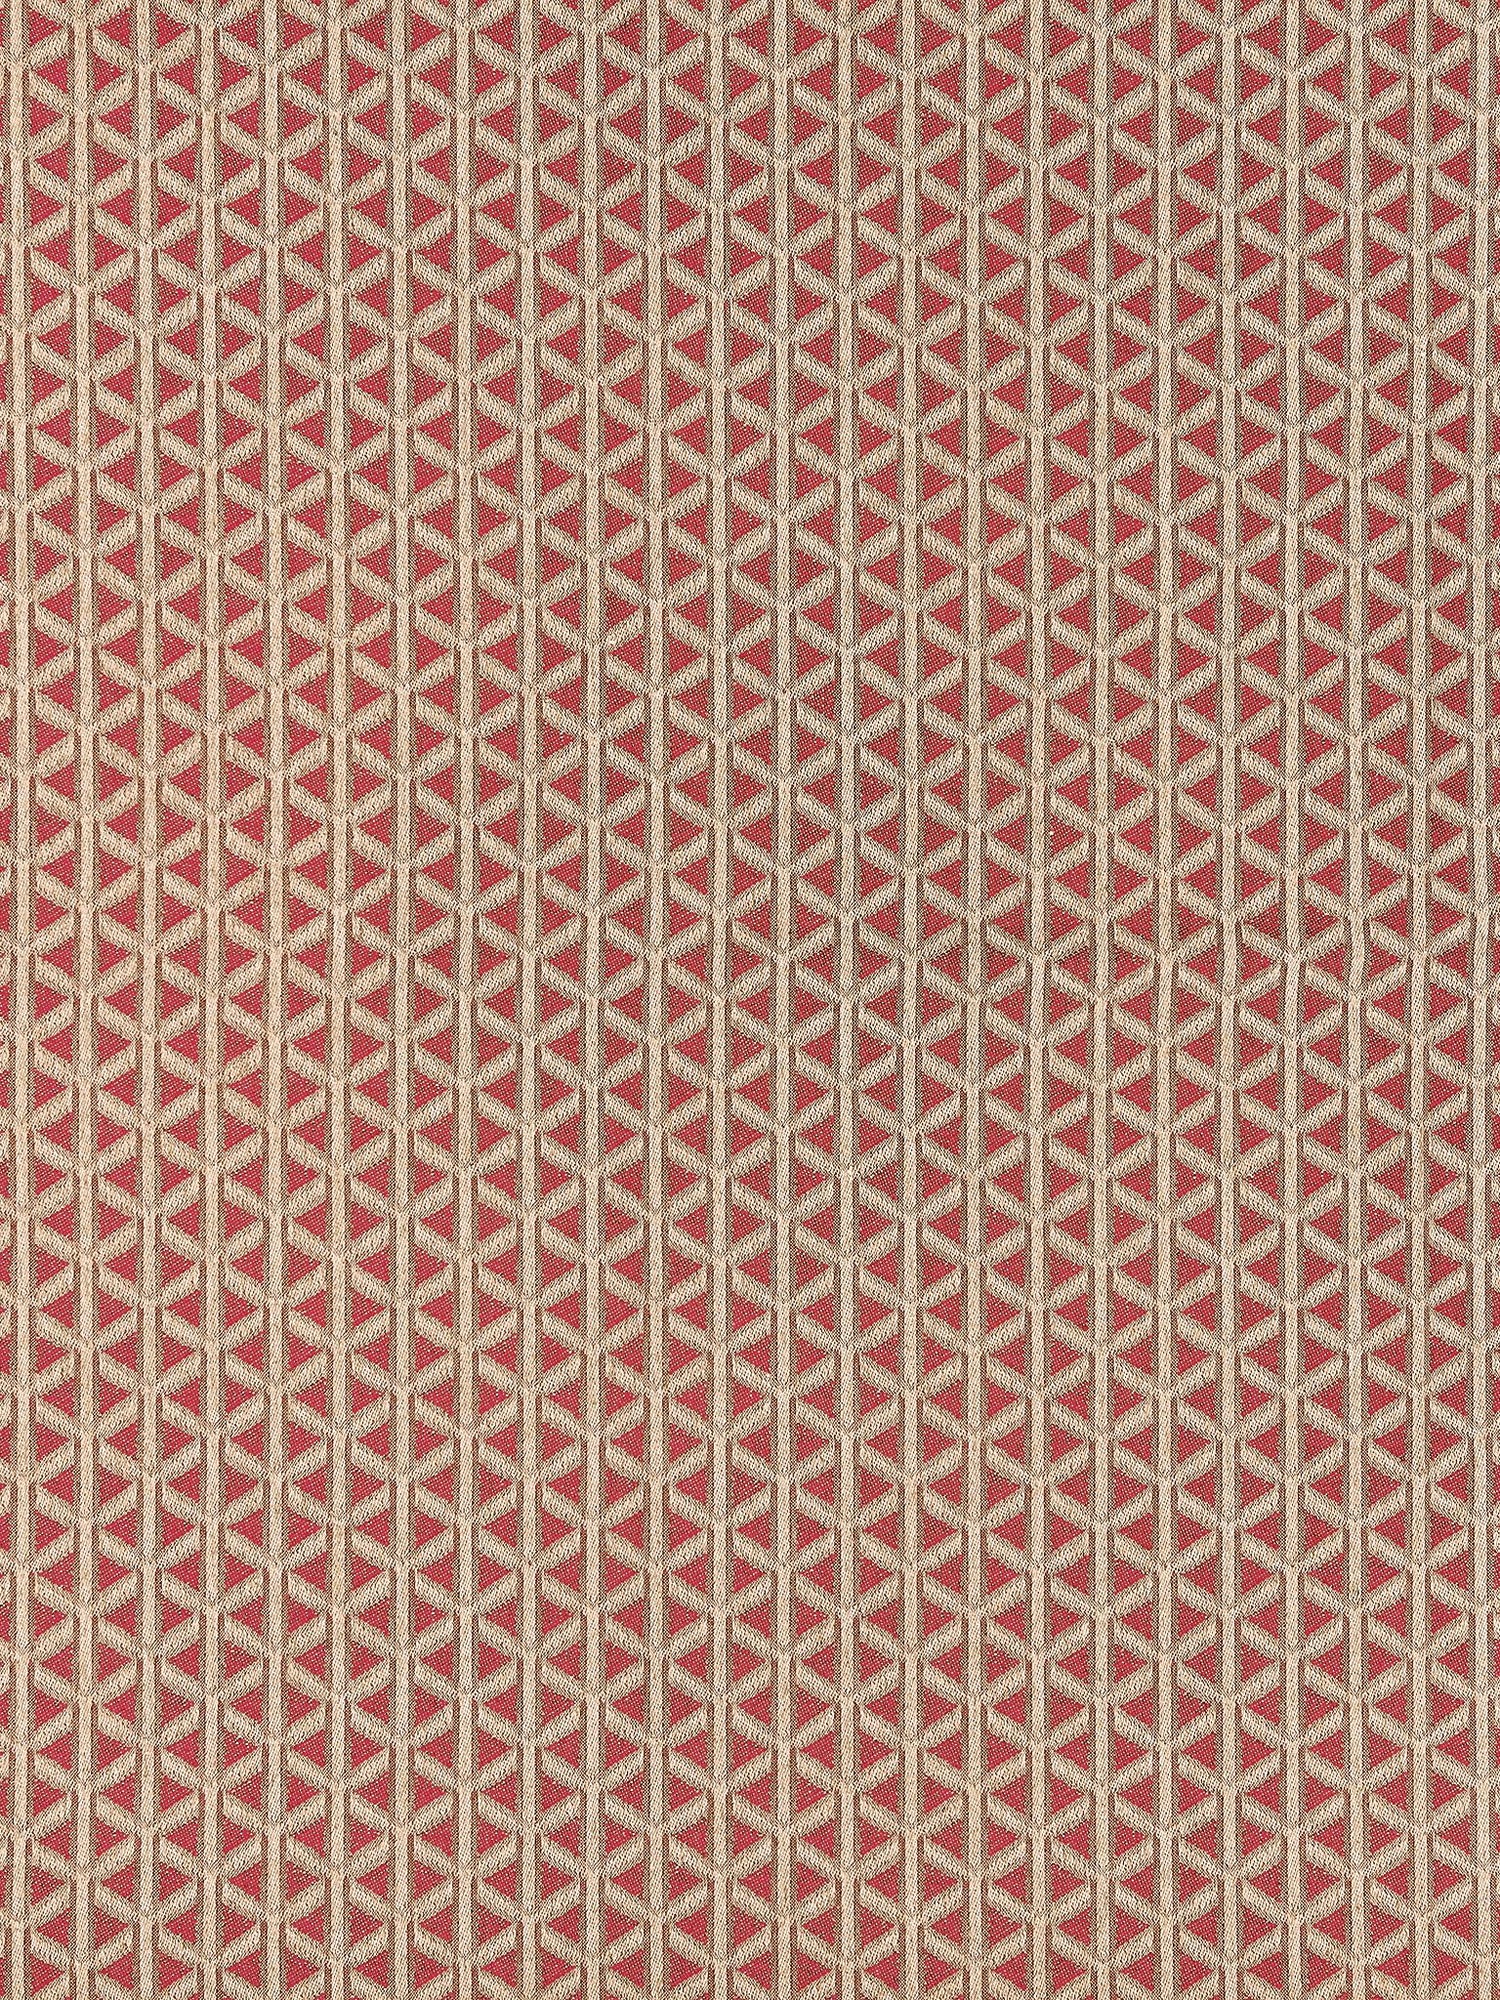 Cross Channel fabric in rouge color - pattern number NK 0005CROS - by Scalamandre in the Old World Weavers collection